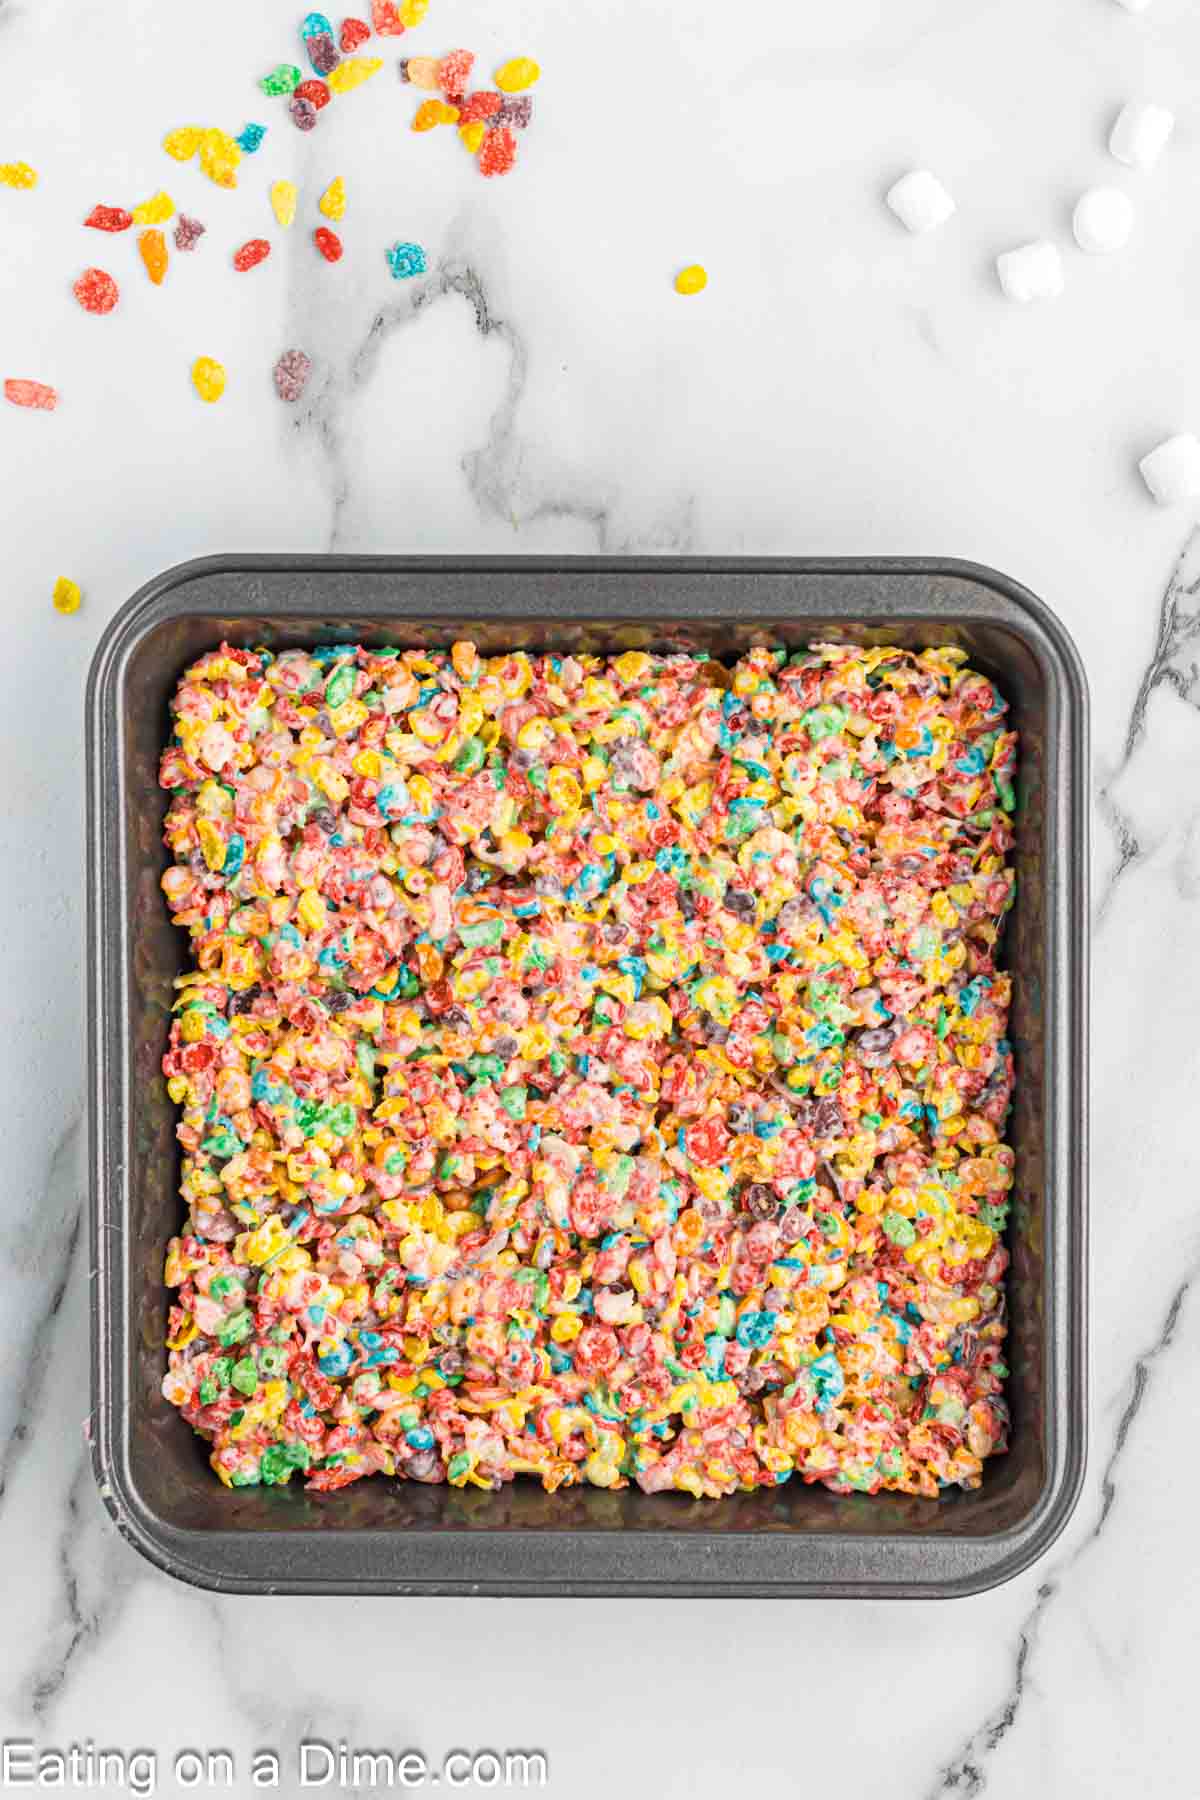 Fruity Pebbles mixture pressed into a baking dish